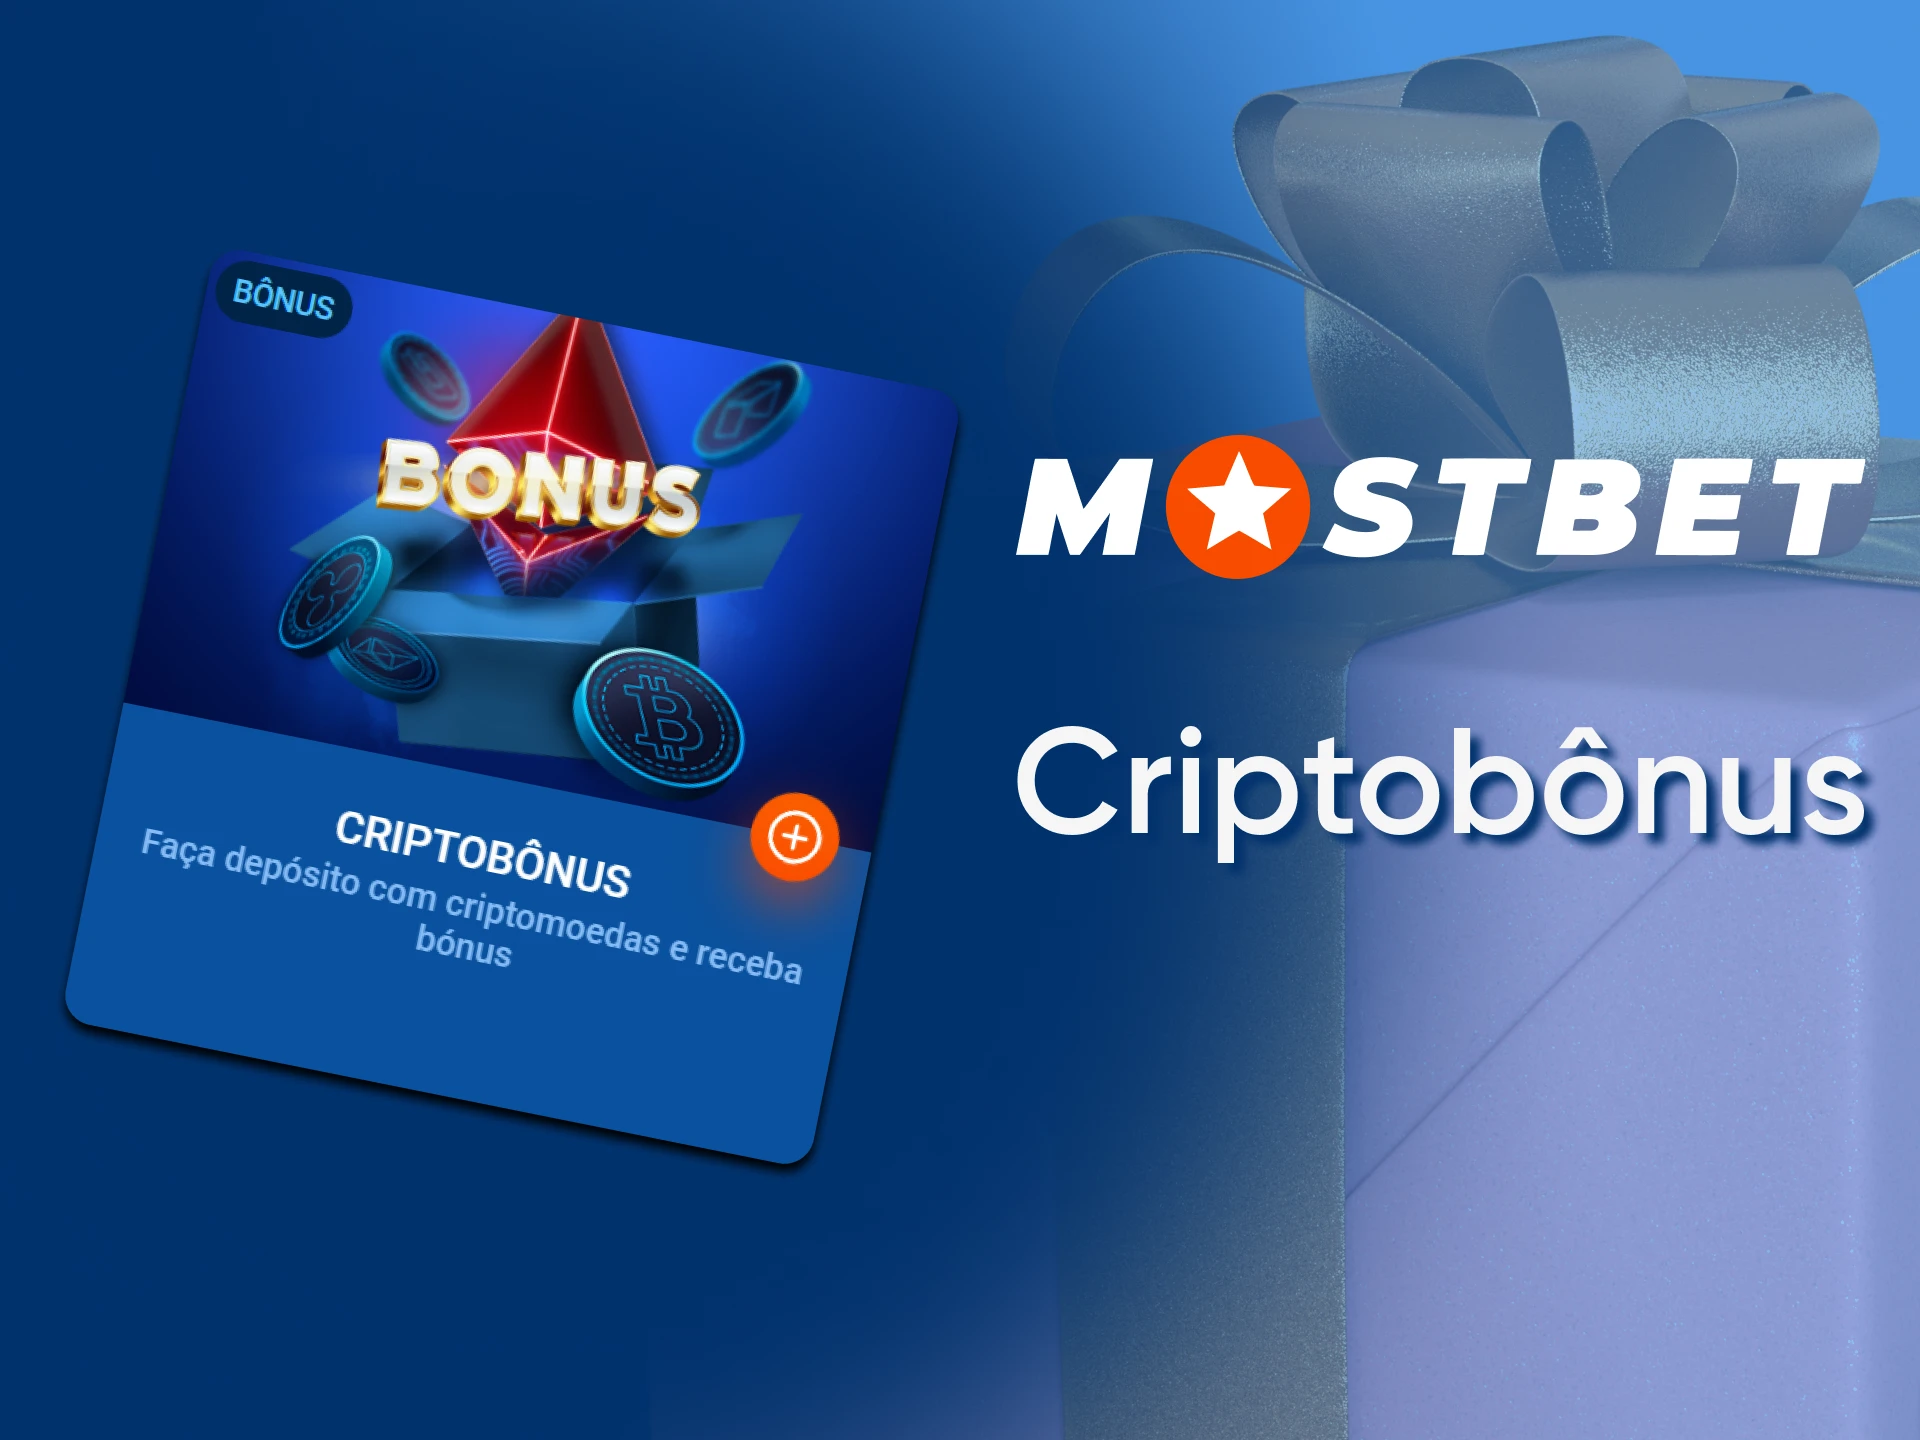 Deposit in cryptocurrency and get a bonus from Mostbet.